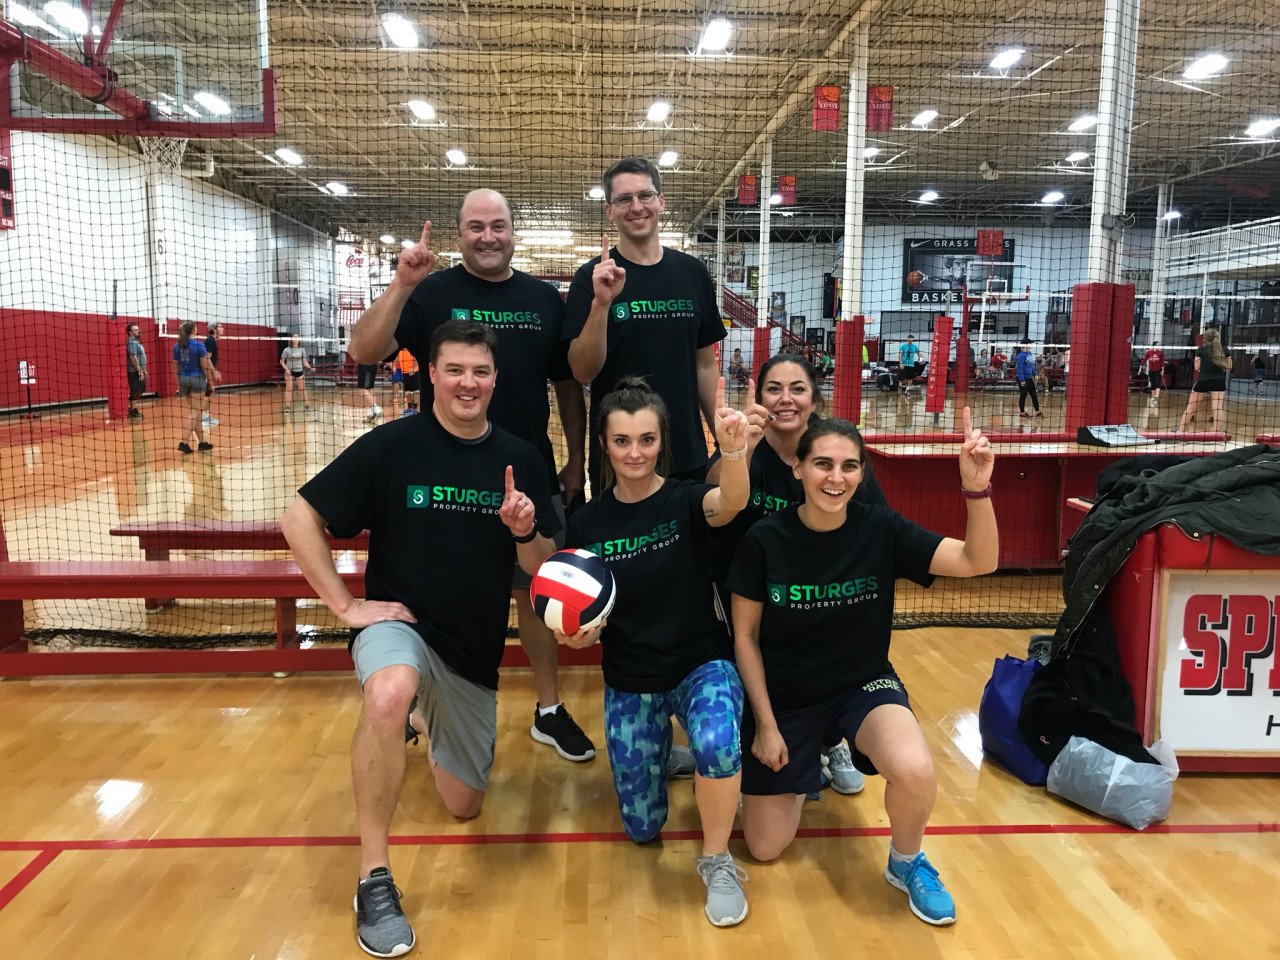 Sturges Property Group - Extracurricular Coed Volleyball Team